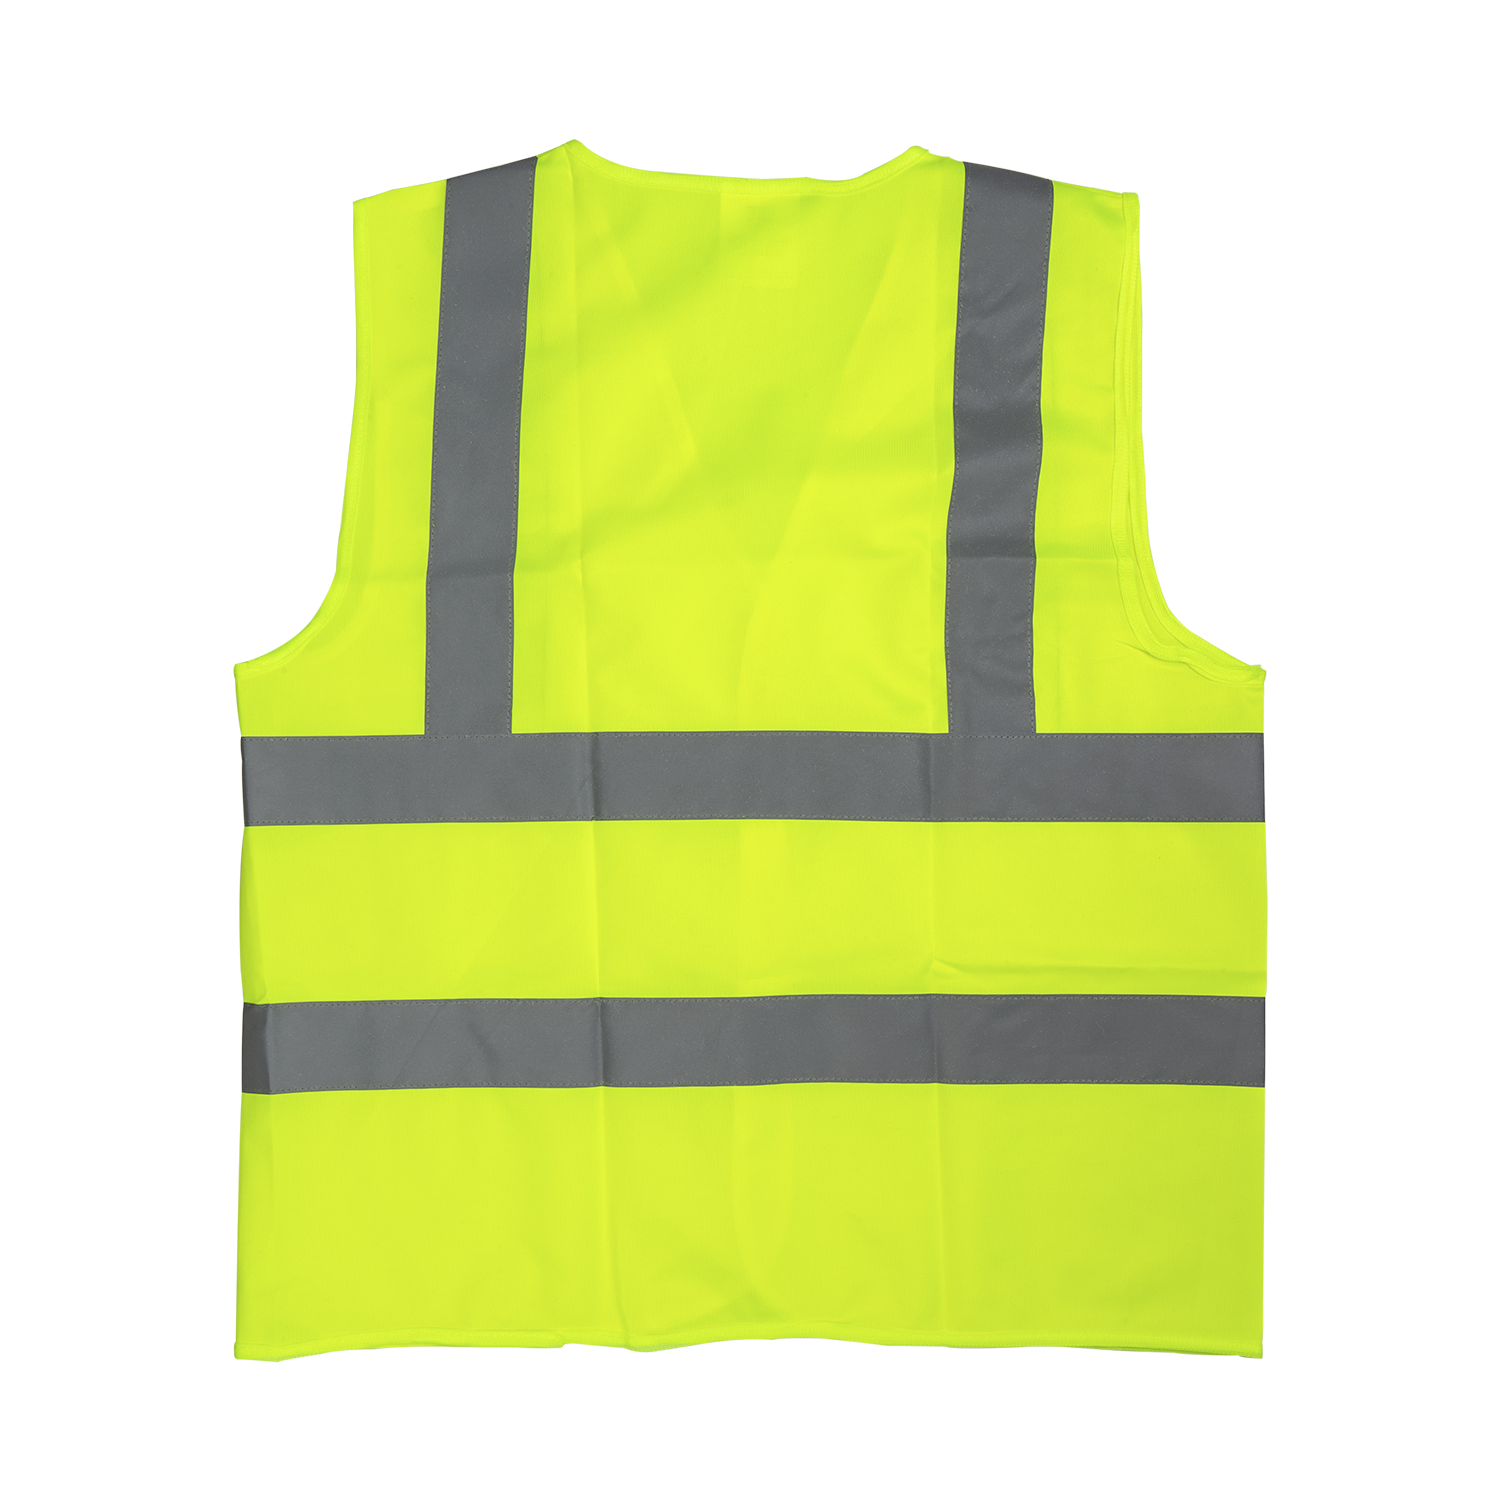 Maria Lime Jersey Front Opening Vest - VELCRO® Brand Fastening